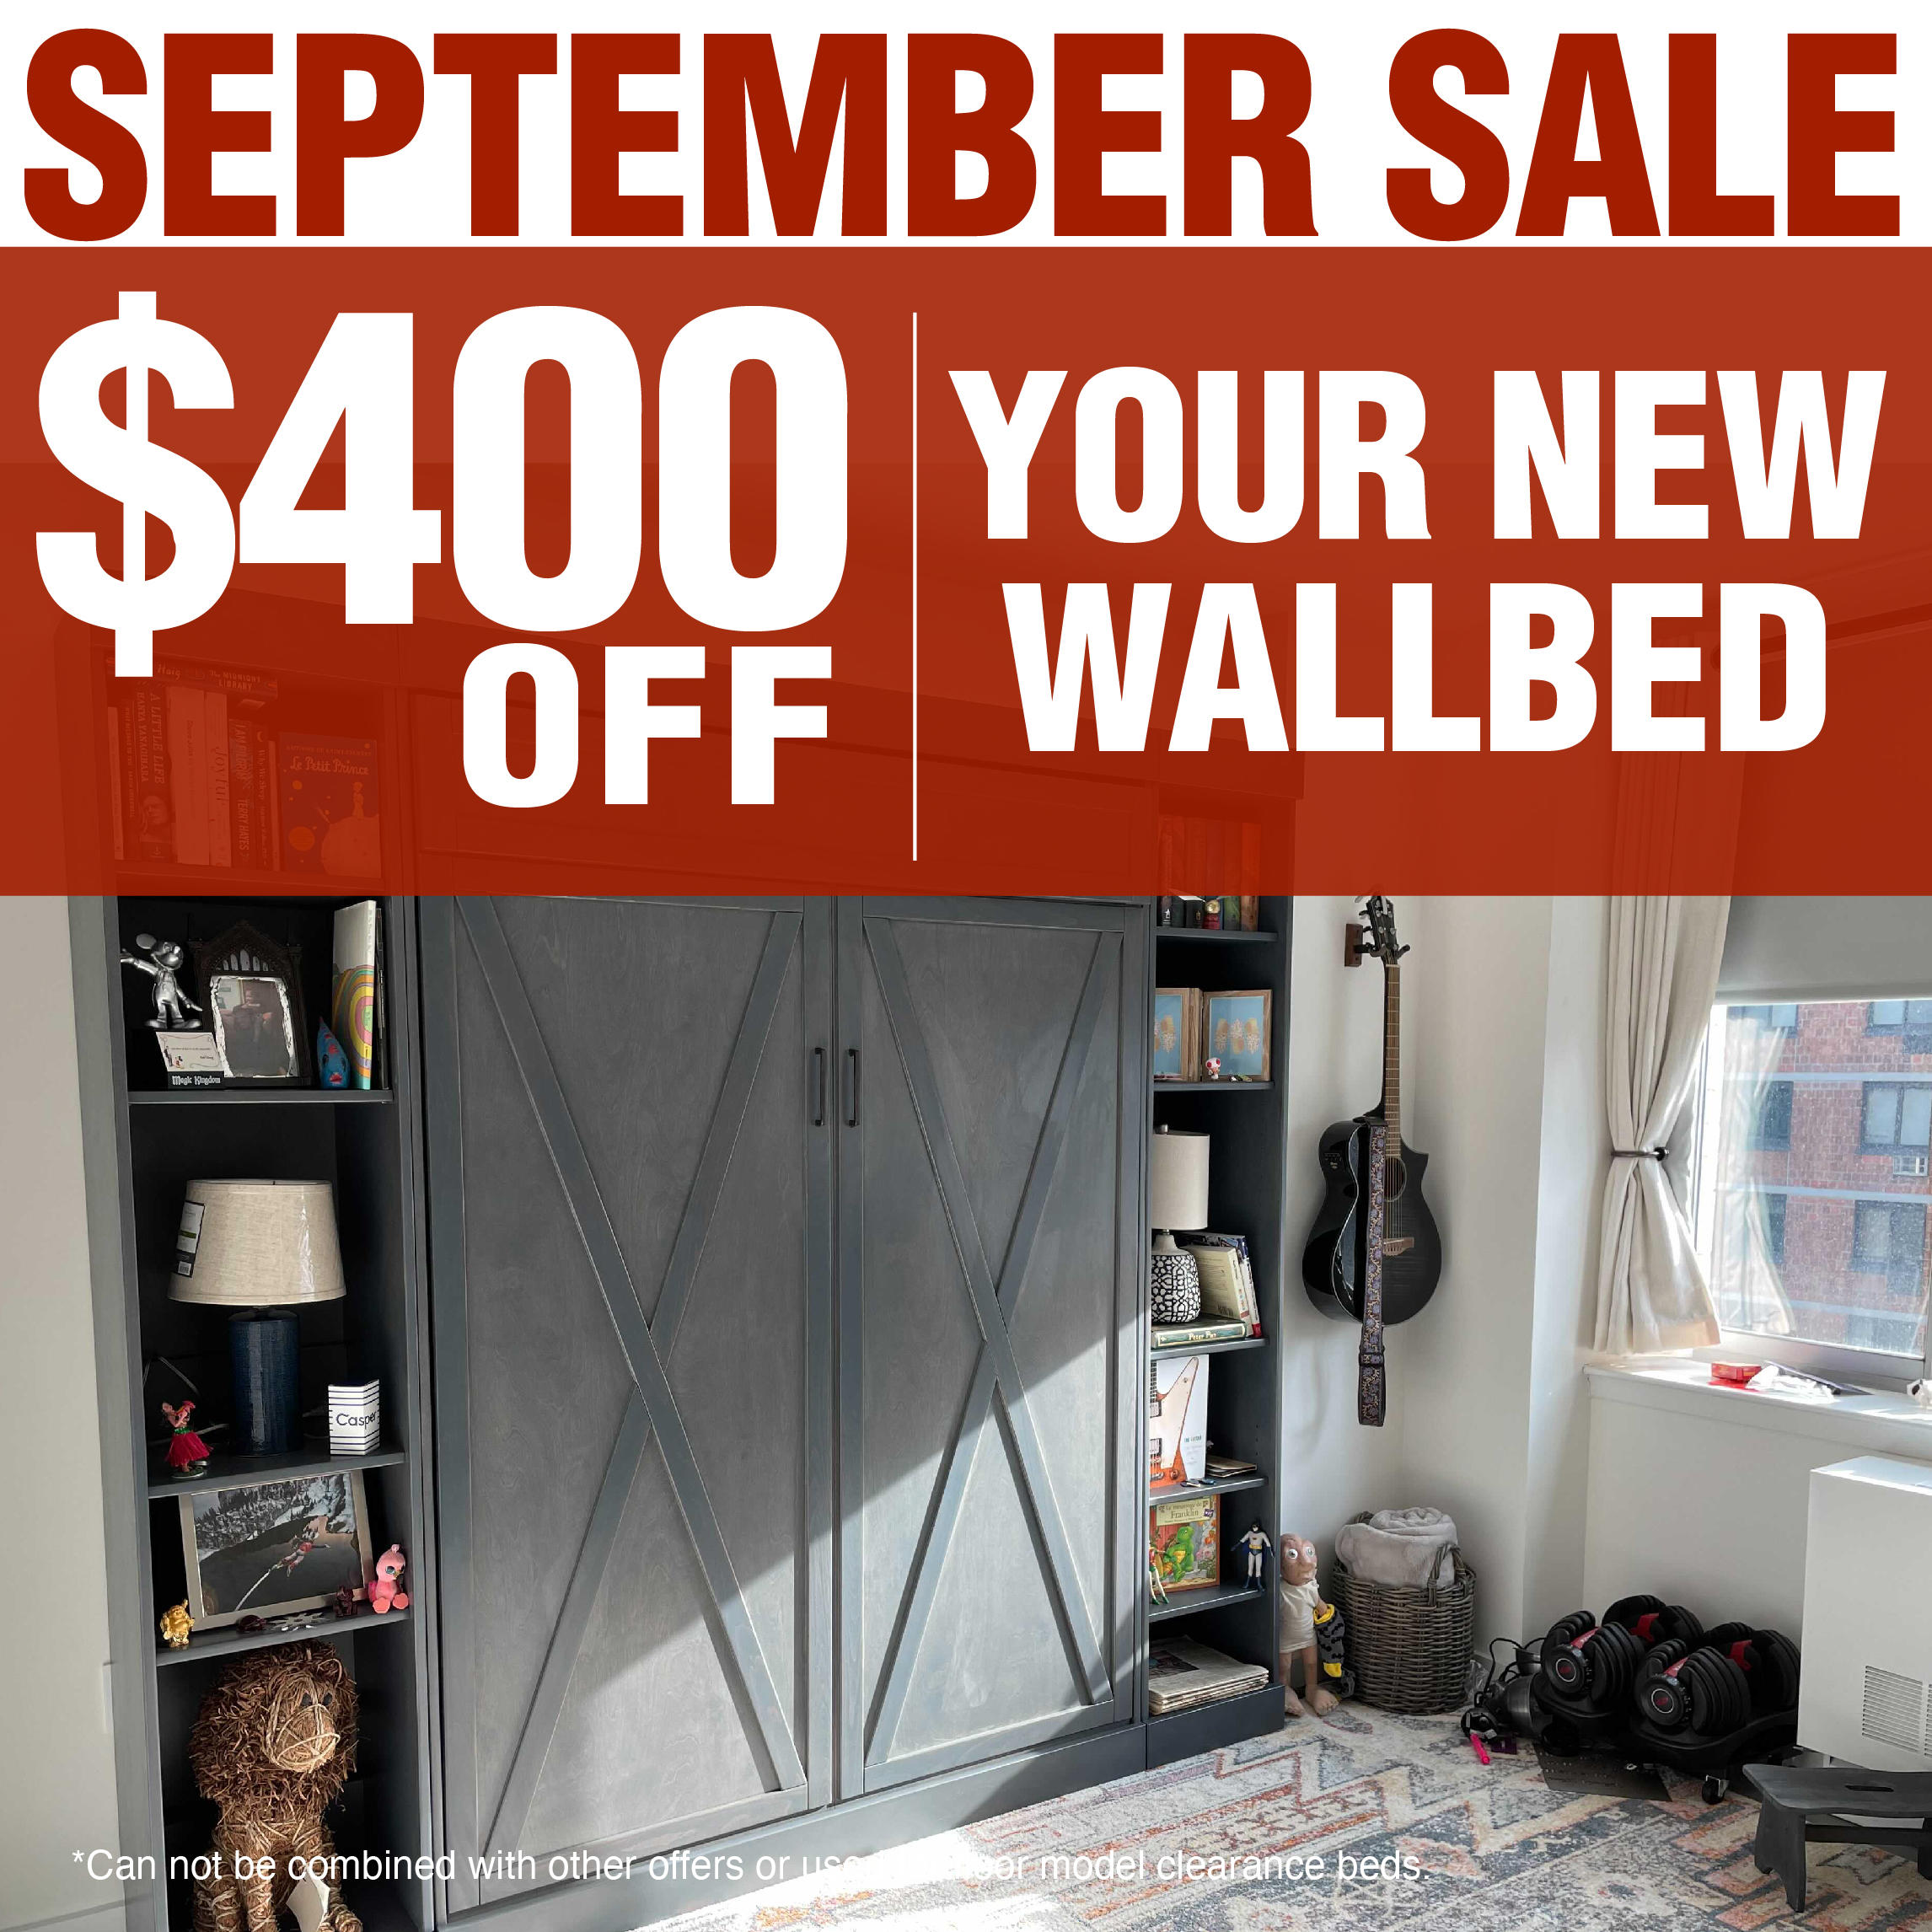 Get $400.00 off your New Wall bed Purchase for the month of September 2023!